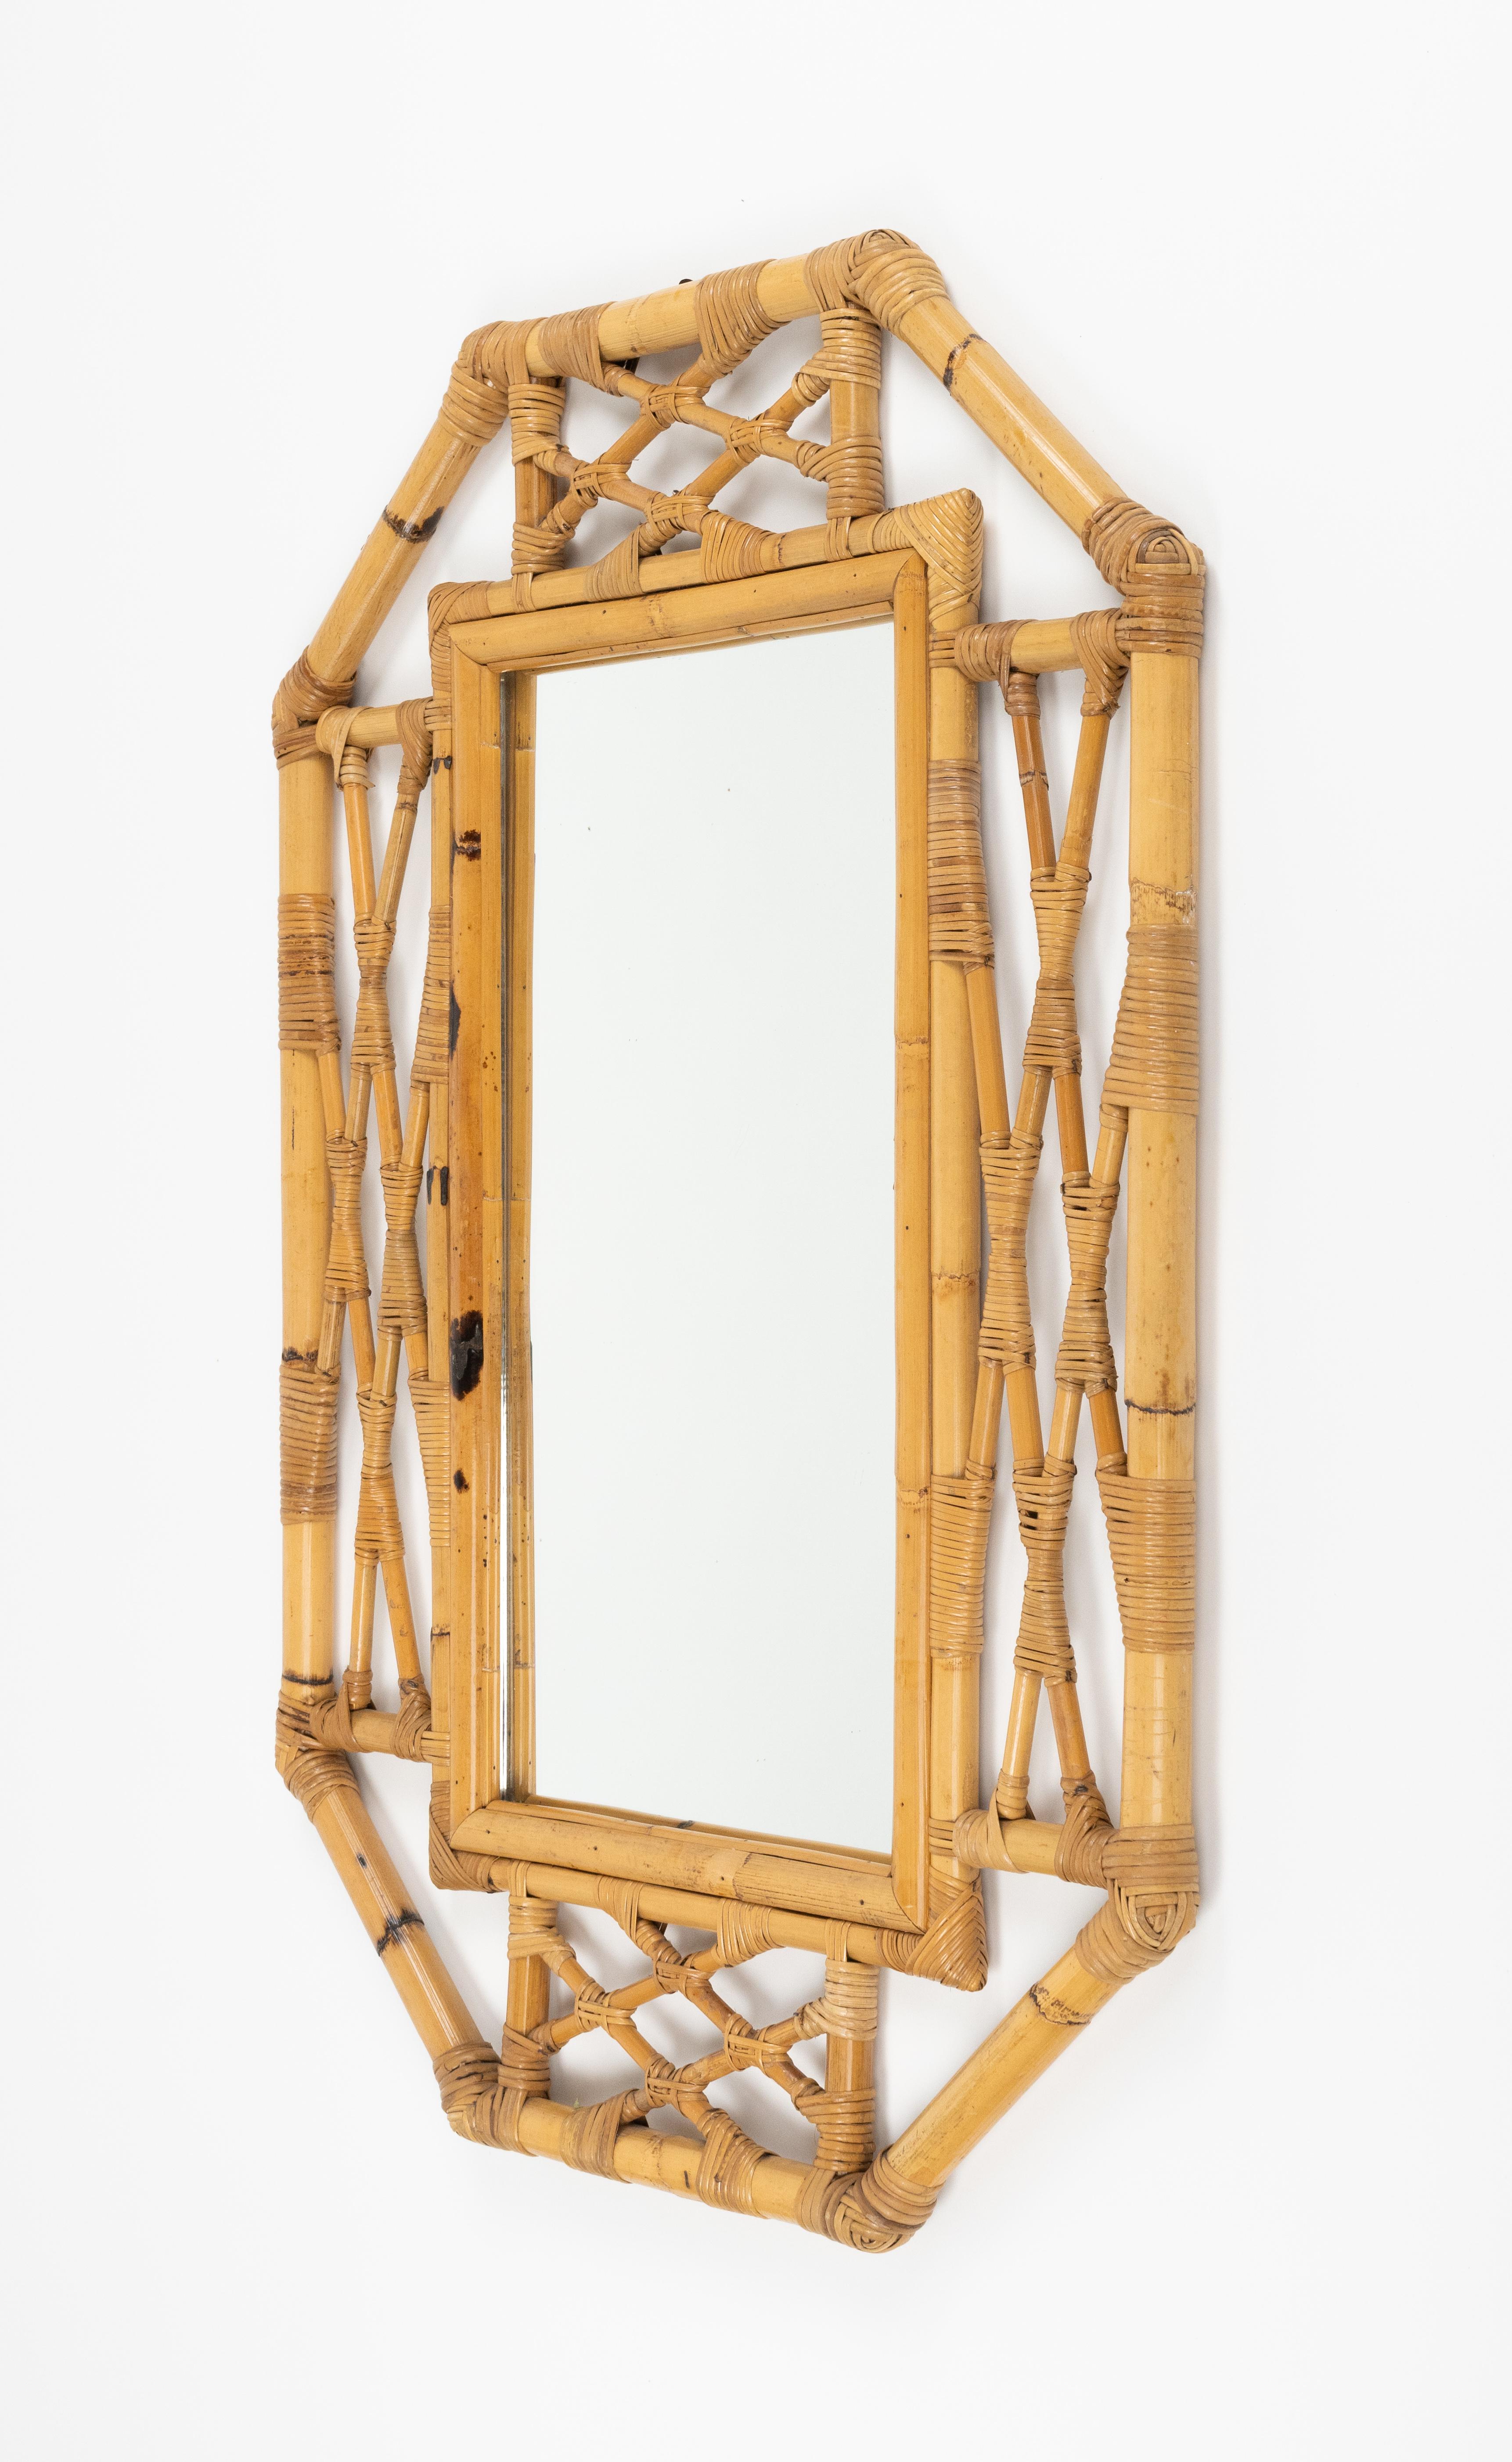 Late 20th Century Midcentury Bamboo and Rattan Wall Mirror Vivai Del Sud Style, Italy 1970s For Sale